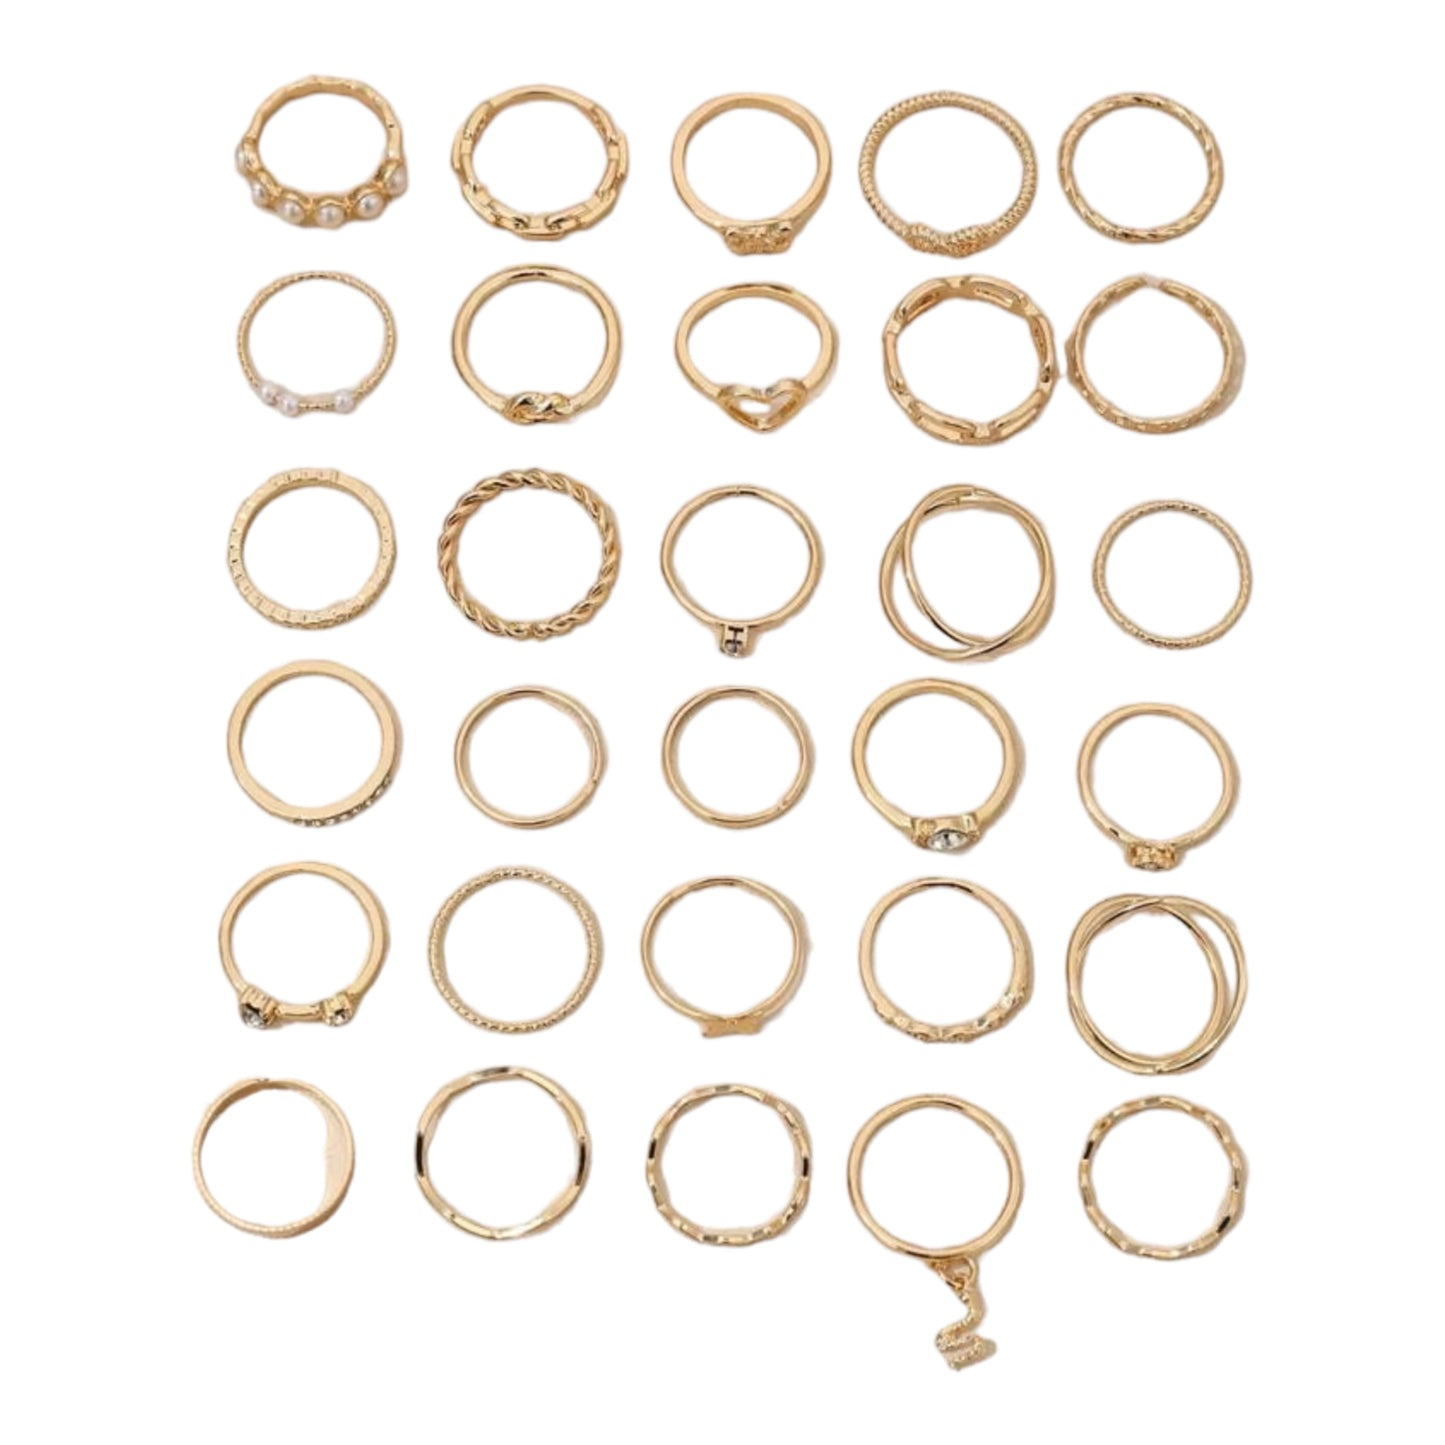 Kinky Pleasure - S026 - Ring Collection Set Gold Or Silver - 30 Pieces